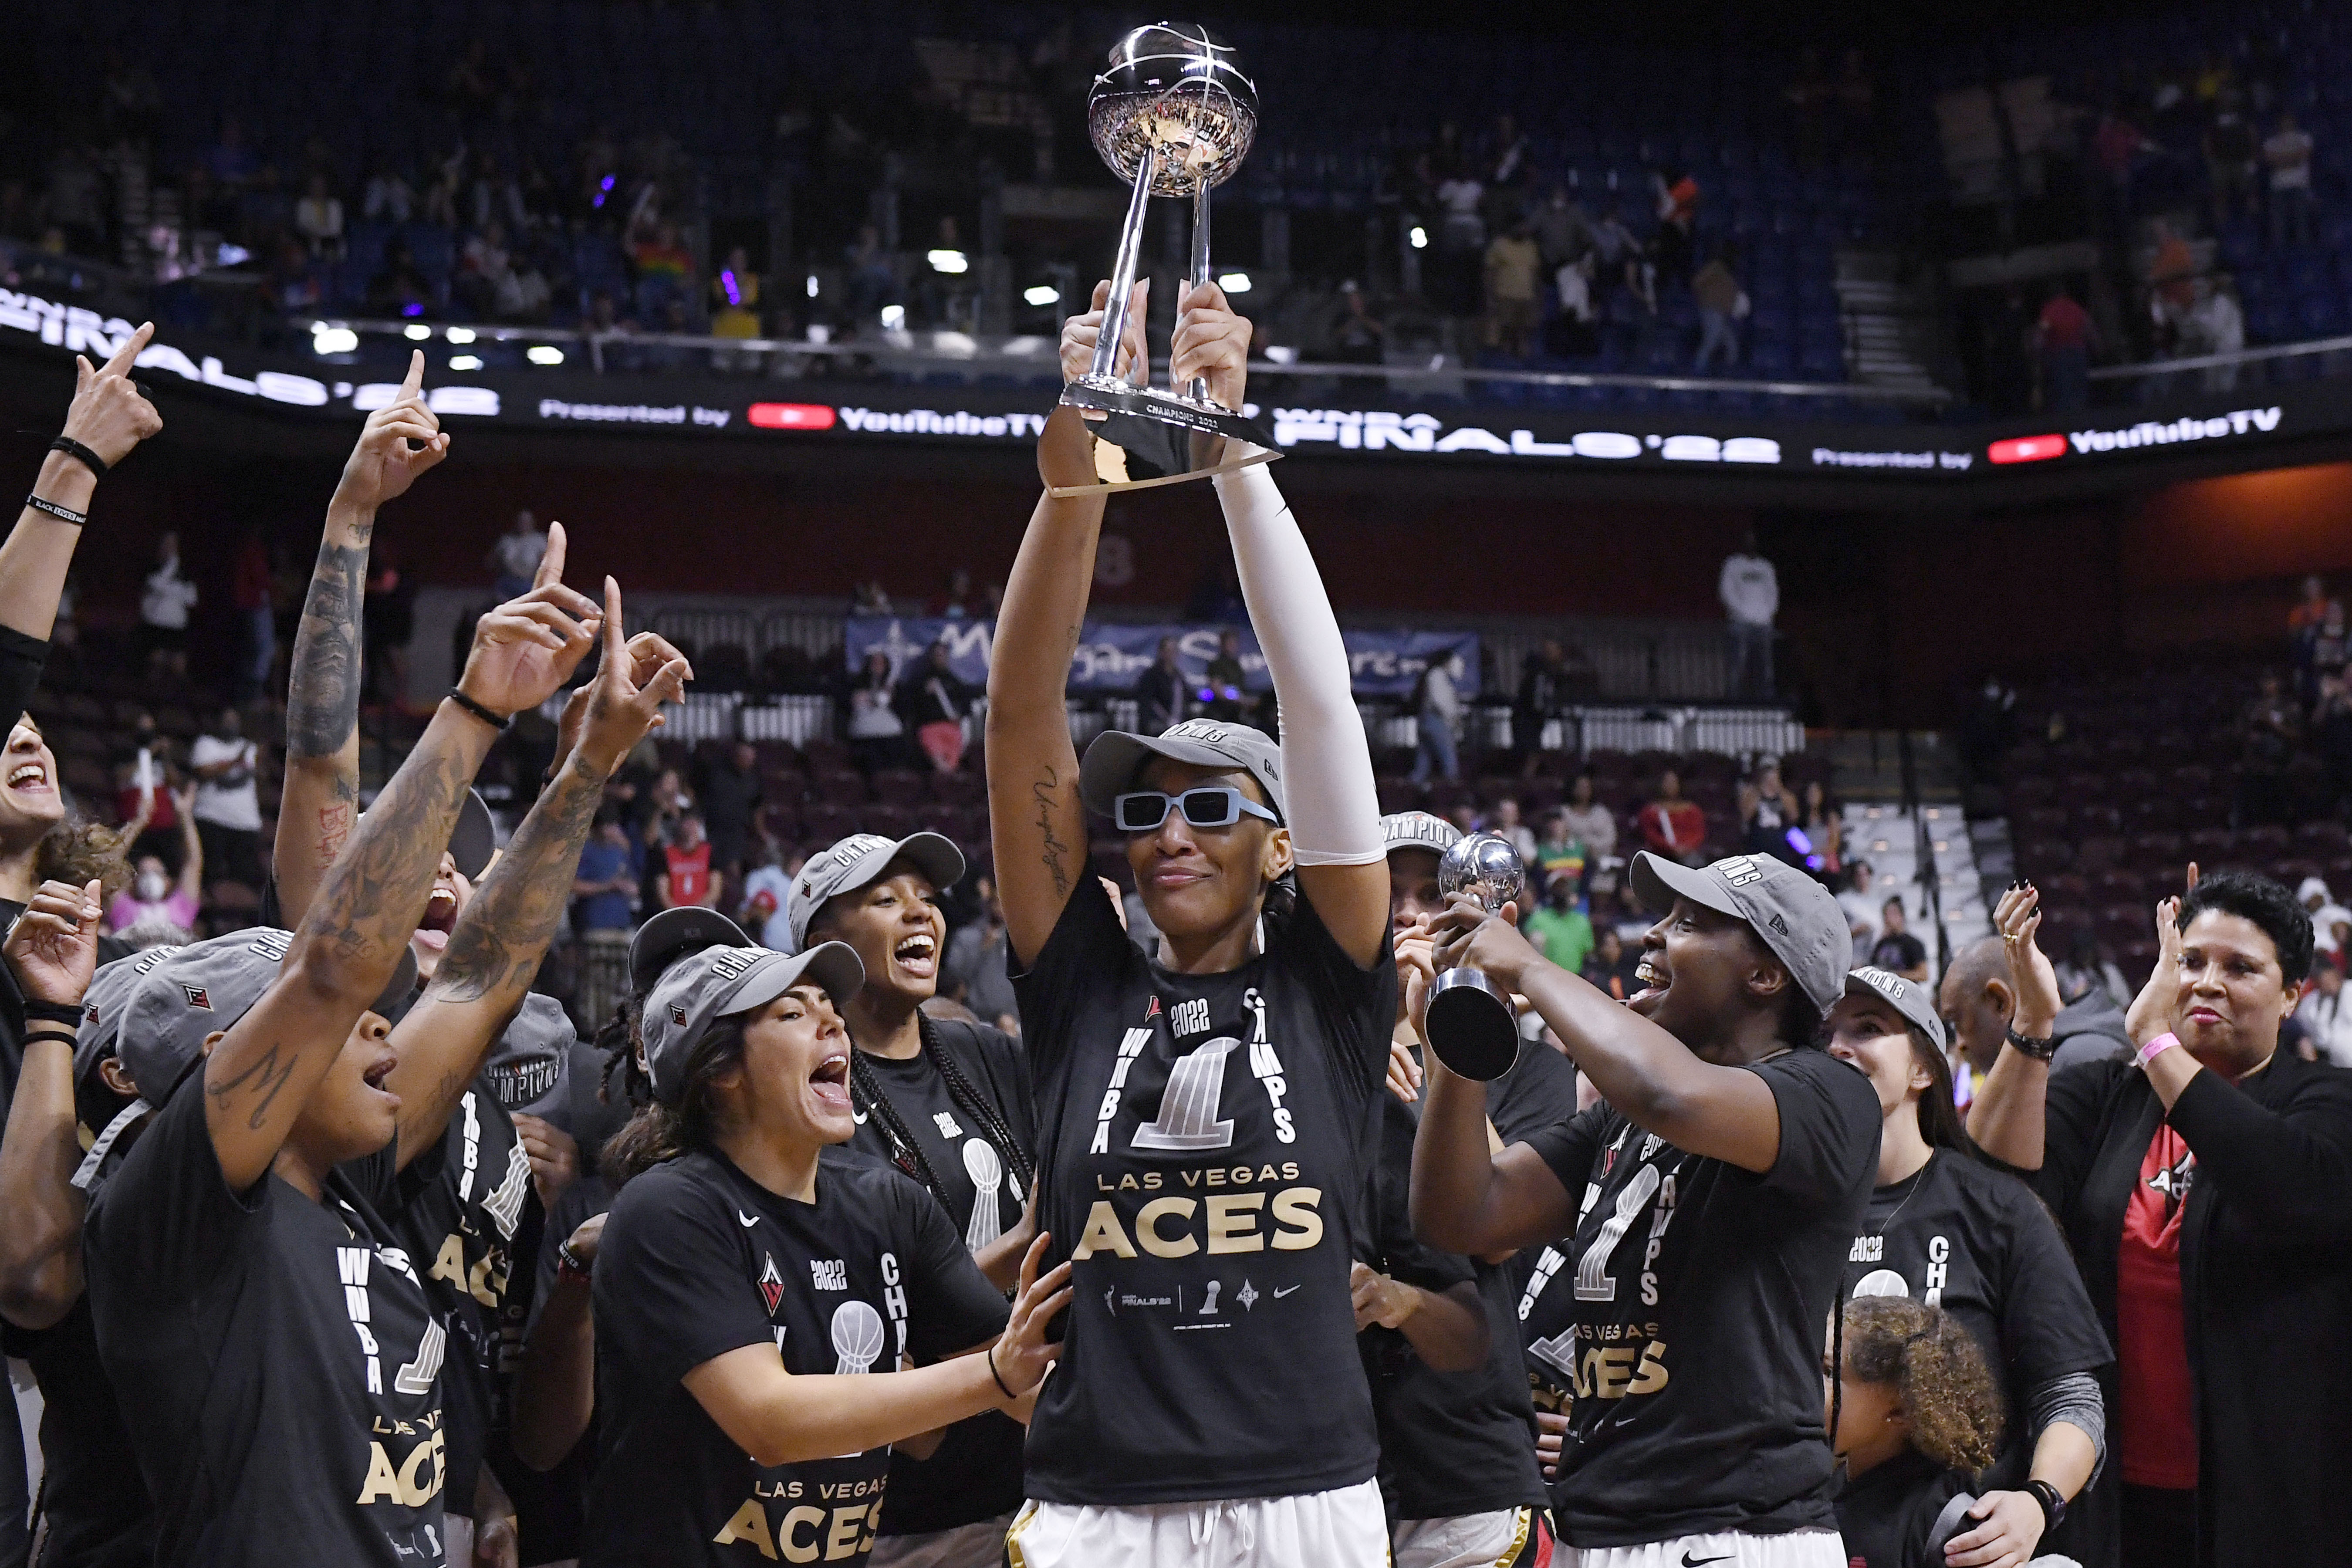 Las Vegas Aces are first repeat WNBA champs - The Iola Register